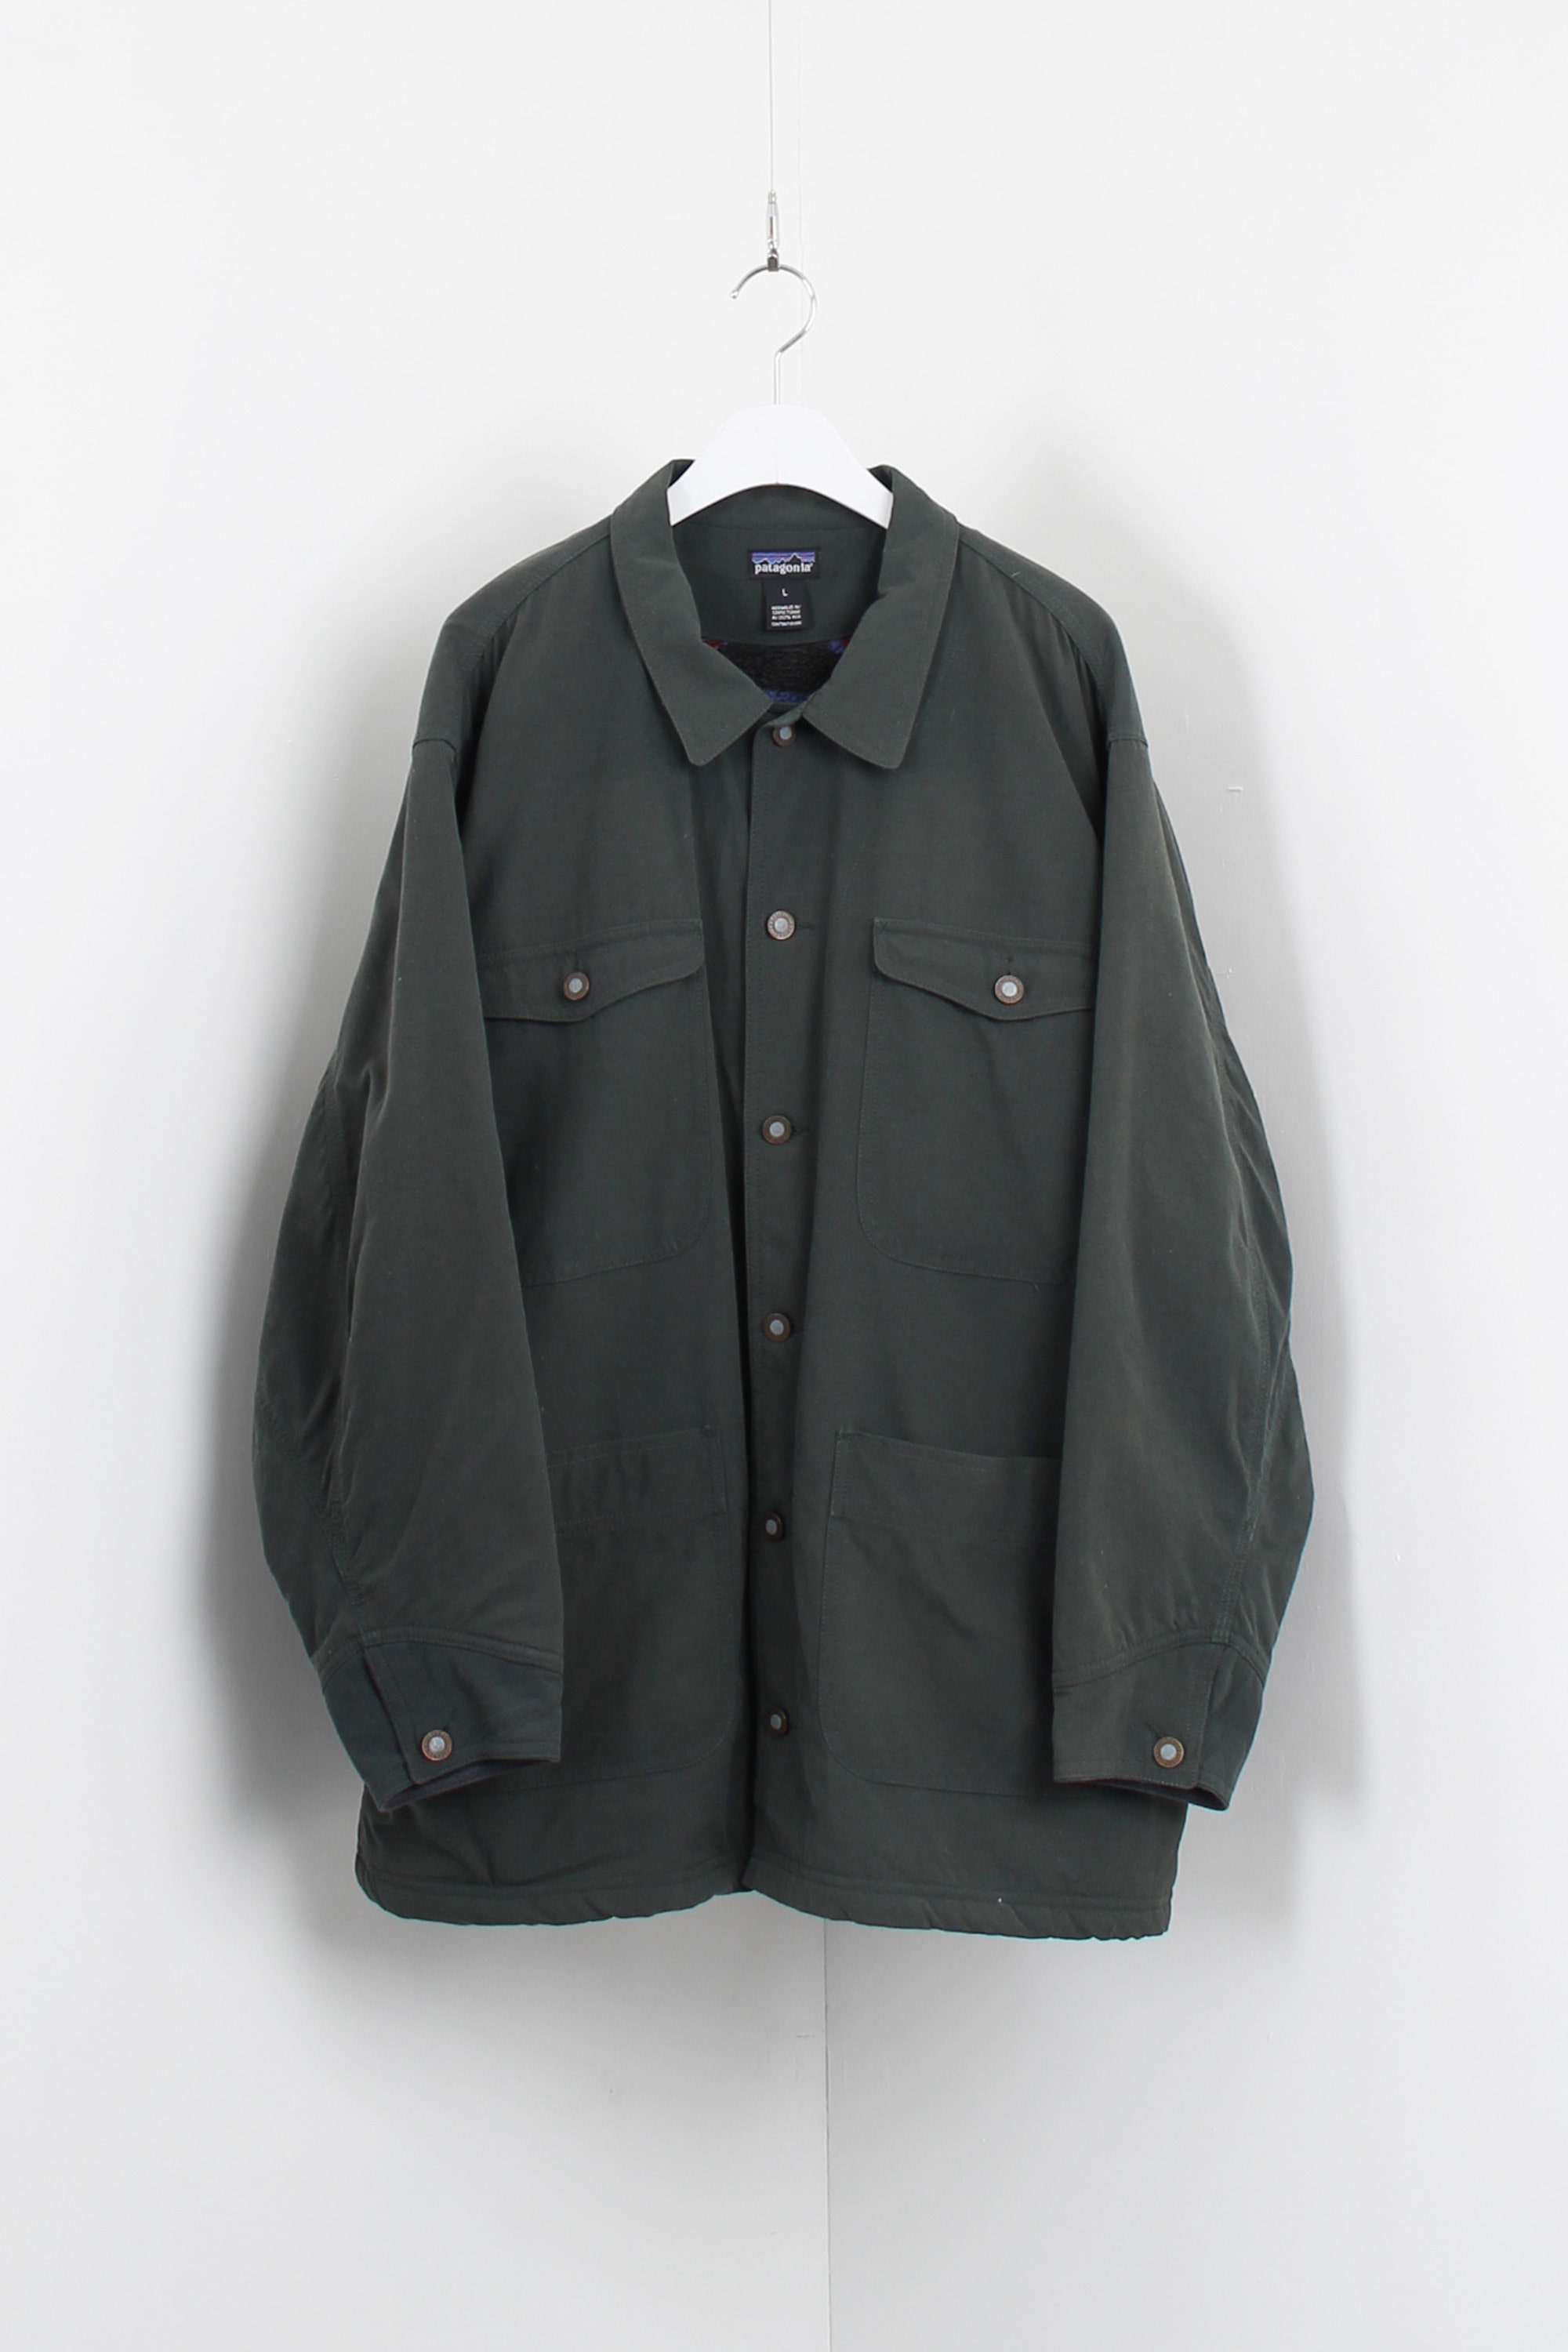 PATAGONIA coverall